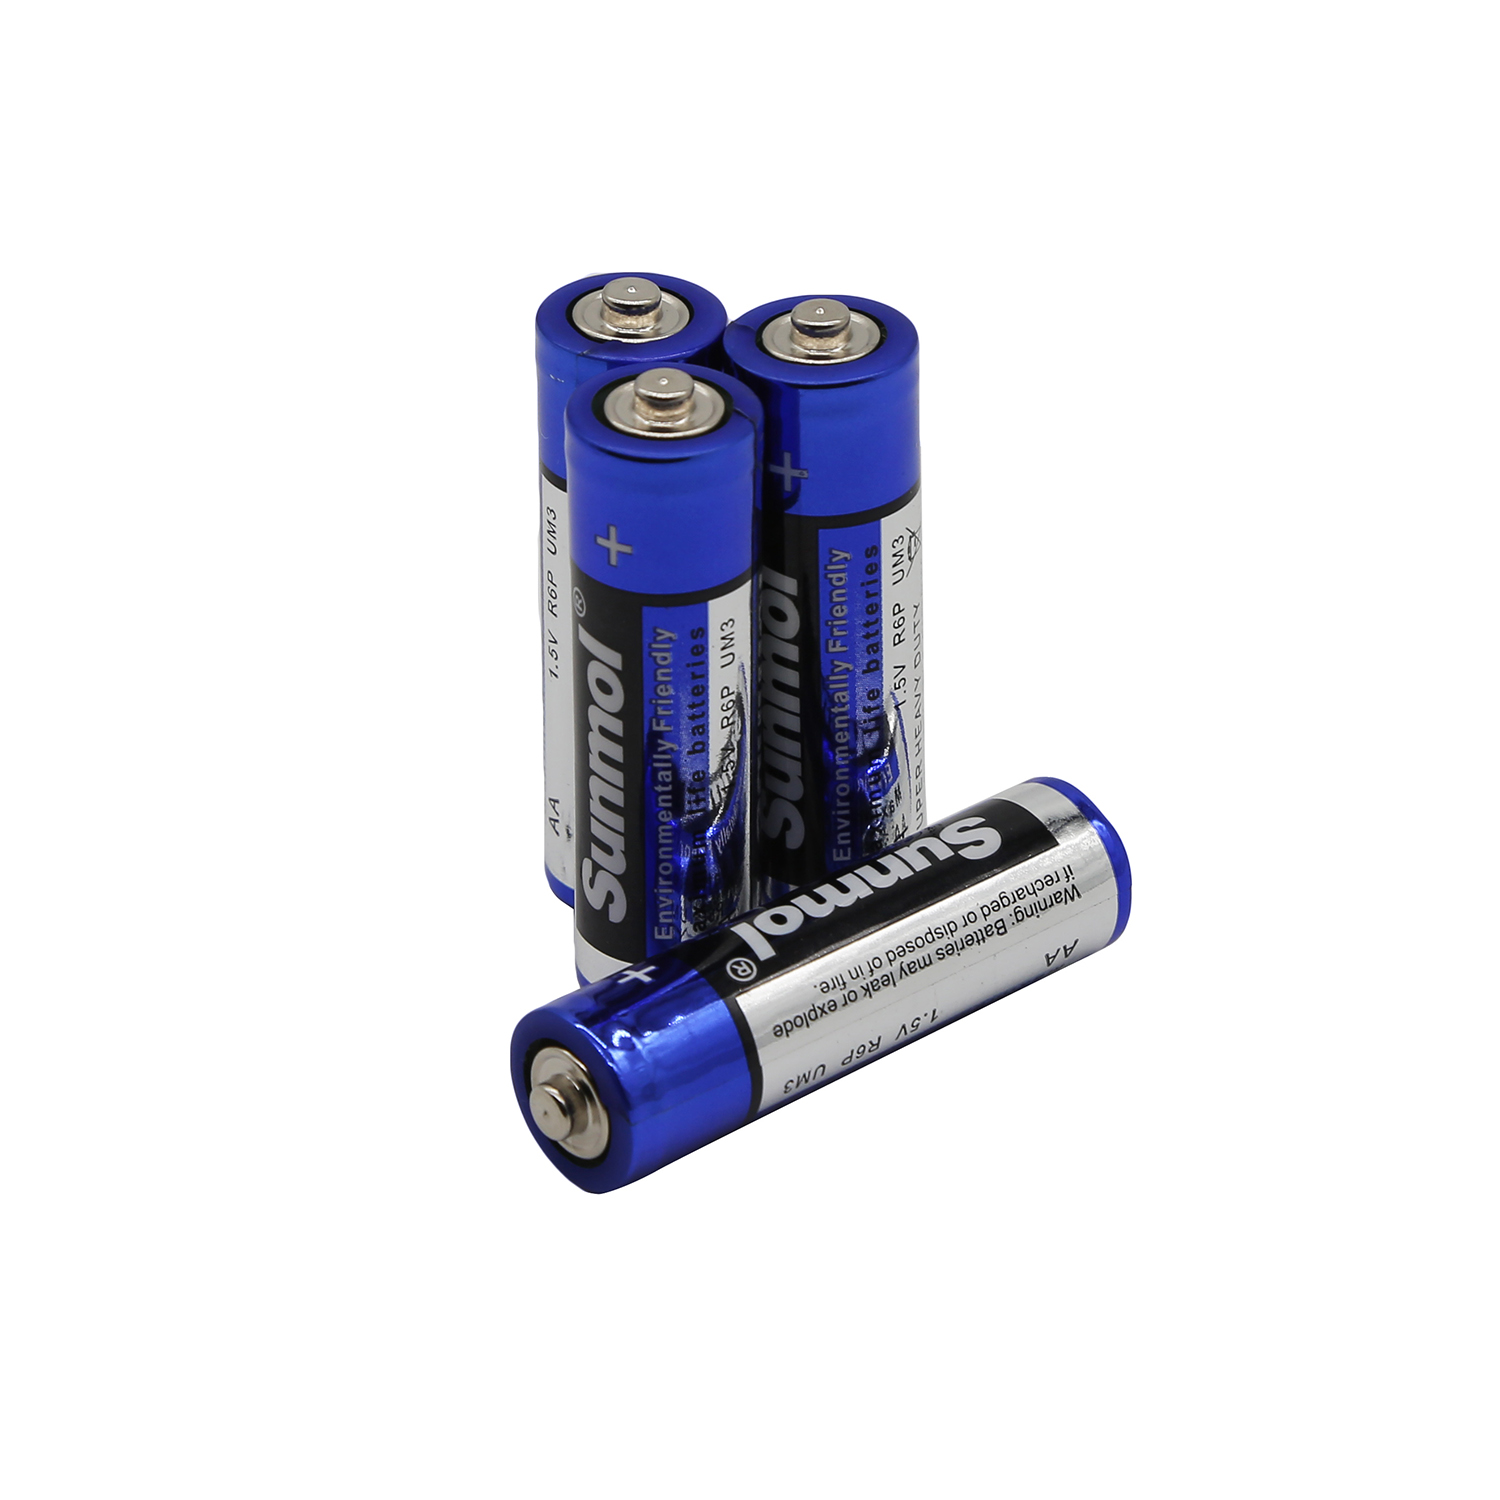 China CR2032 Lithium Battery Supplier - Microcell Battery